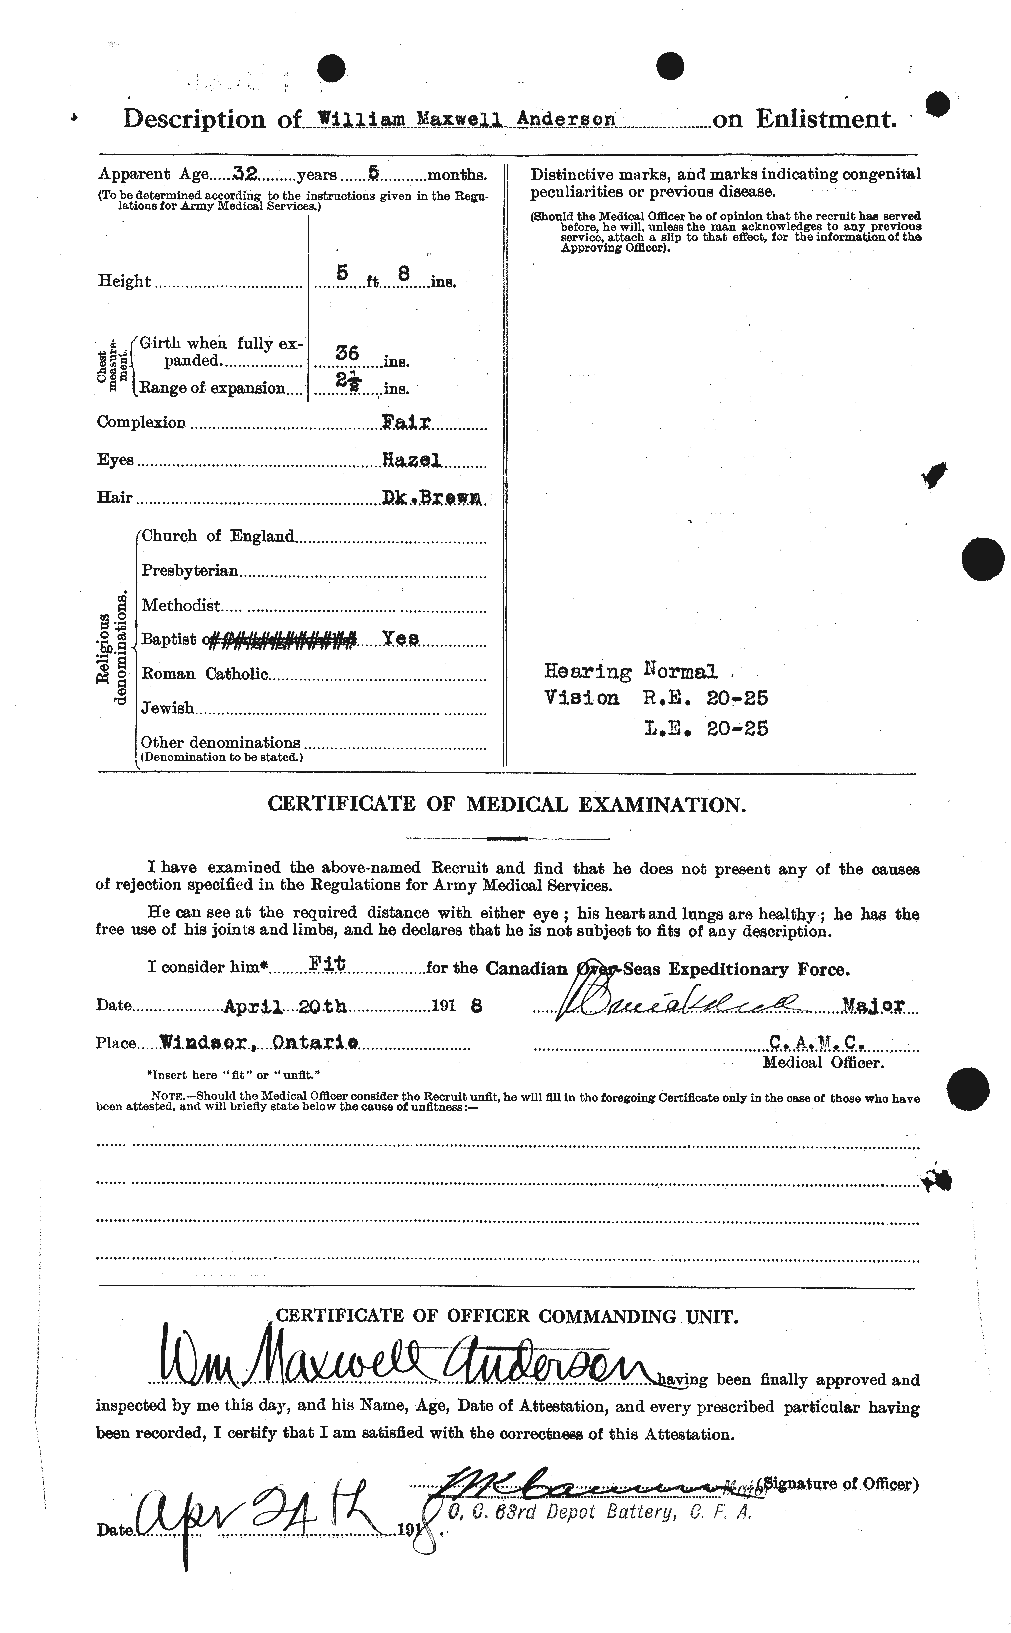 Personnel Records of the First World War - CEF 210685b